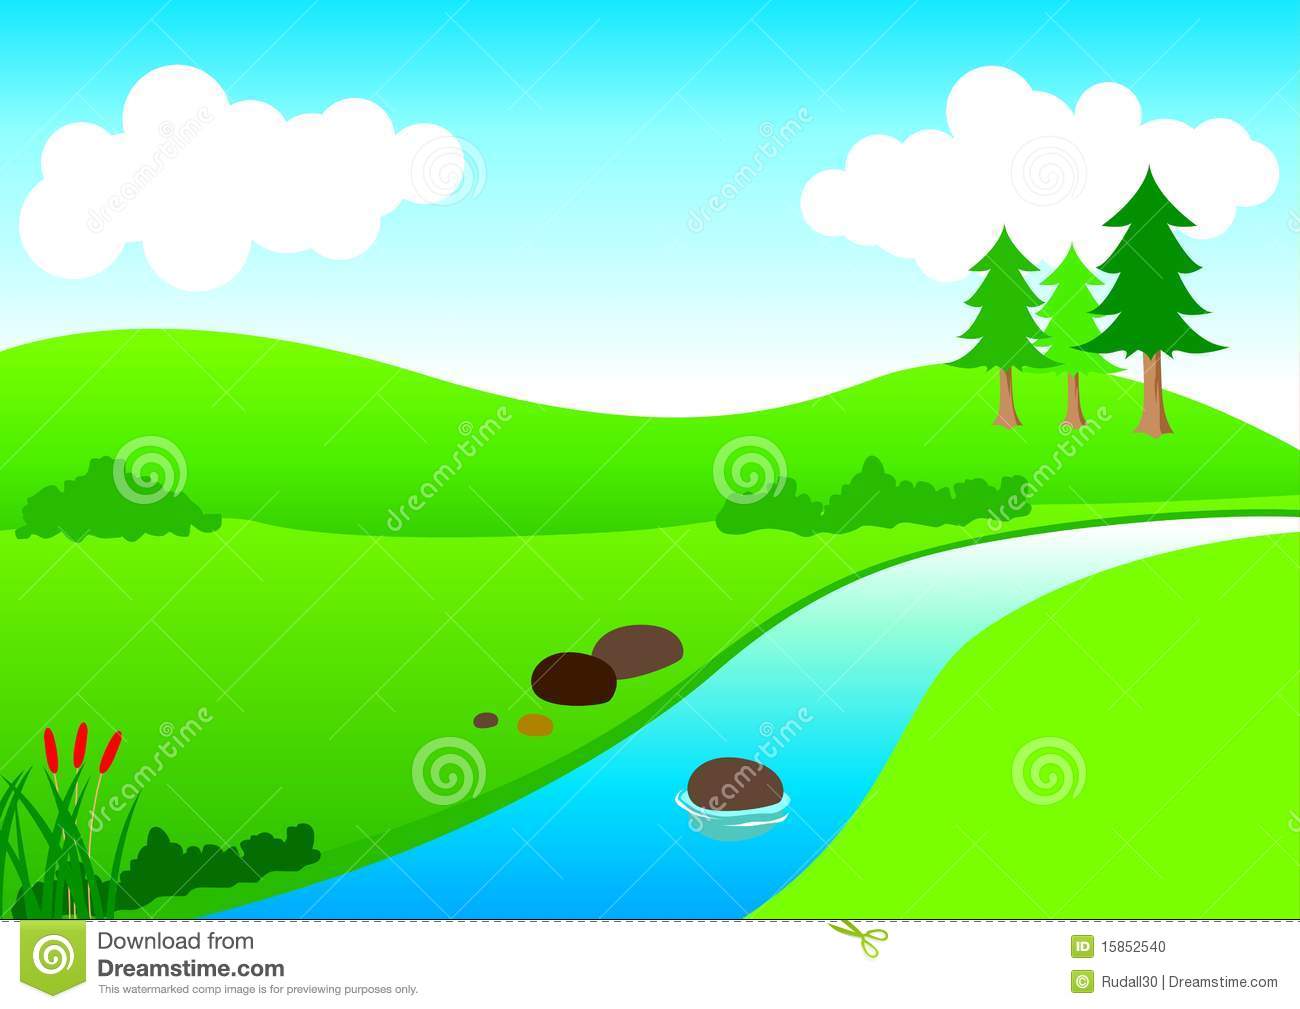 Winding River Clipart   Clipart Panda   Free Clipart Images